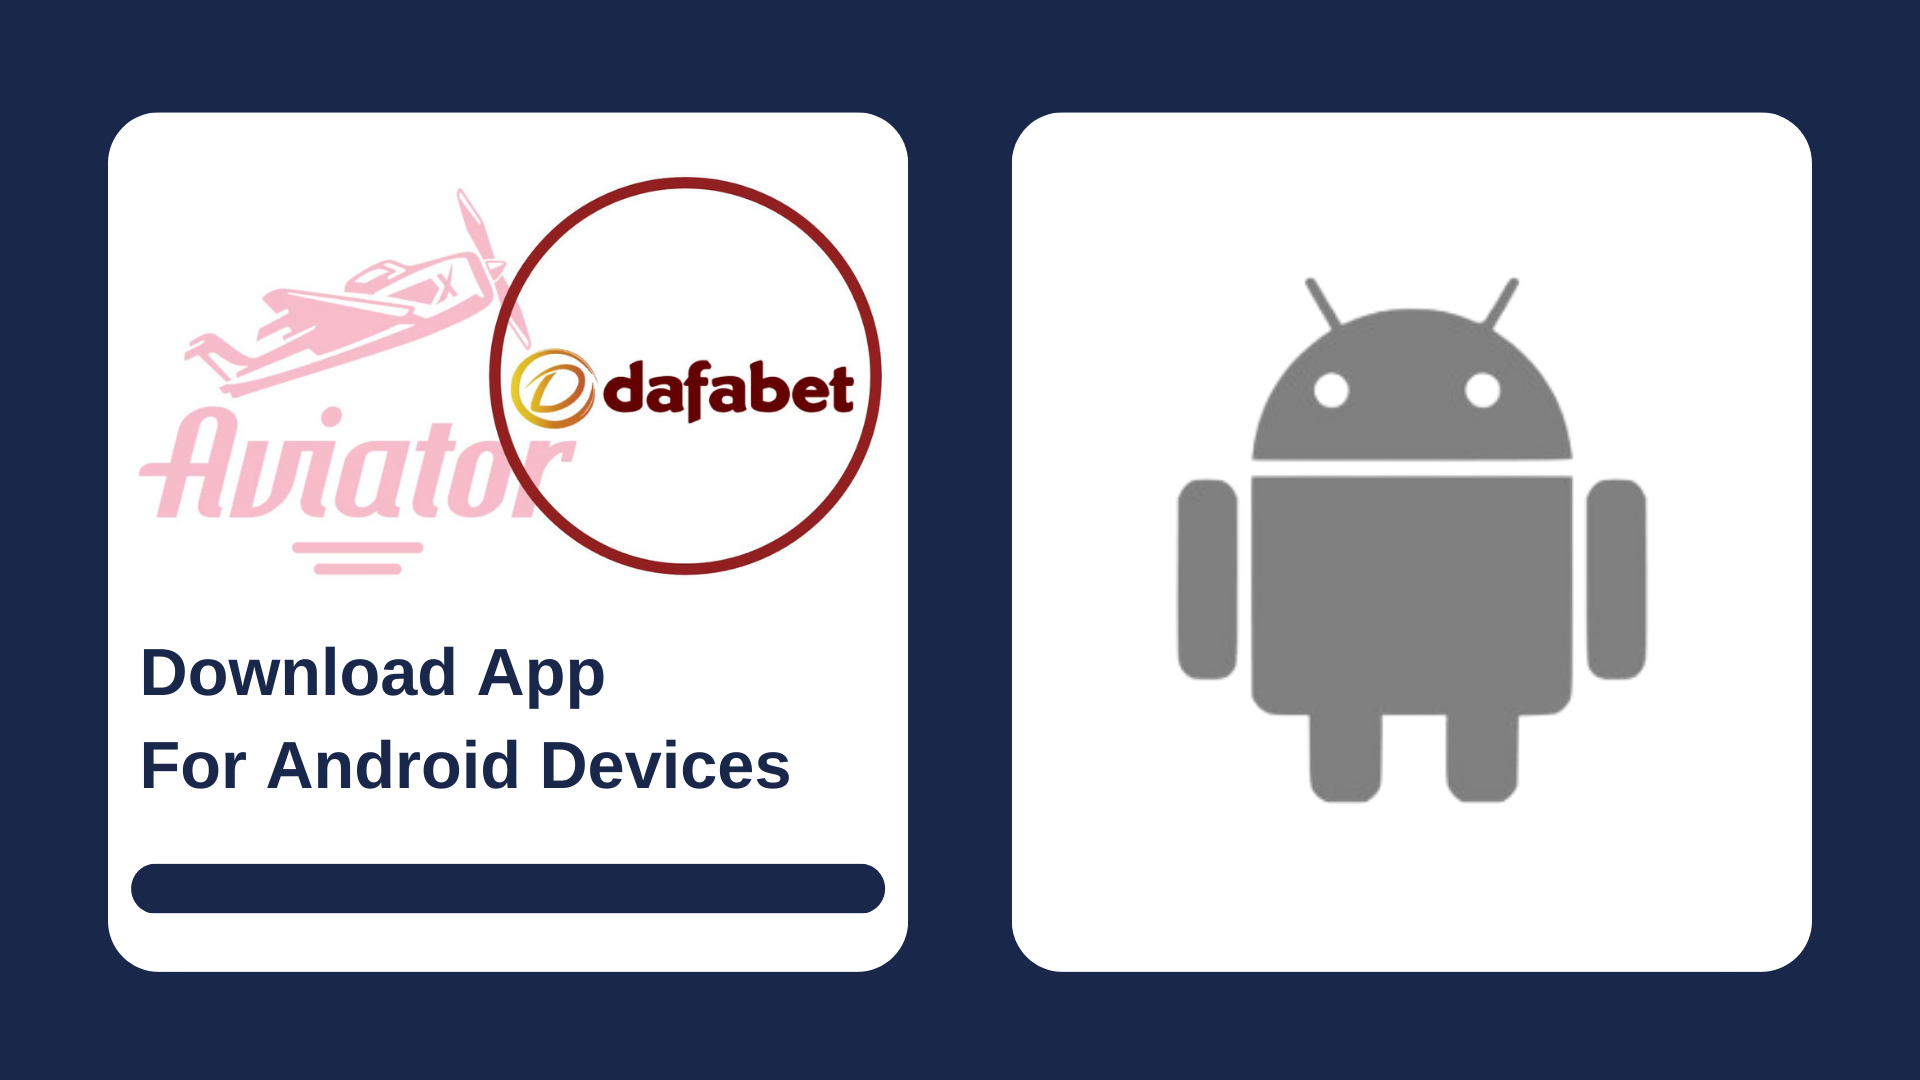 First picture showing Aviator and Dafabet logos with text, and second - Android icon